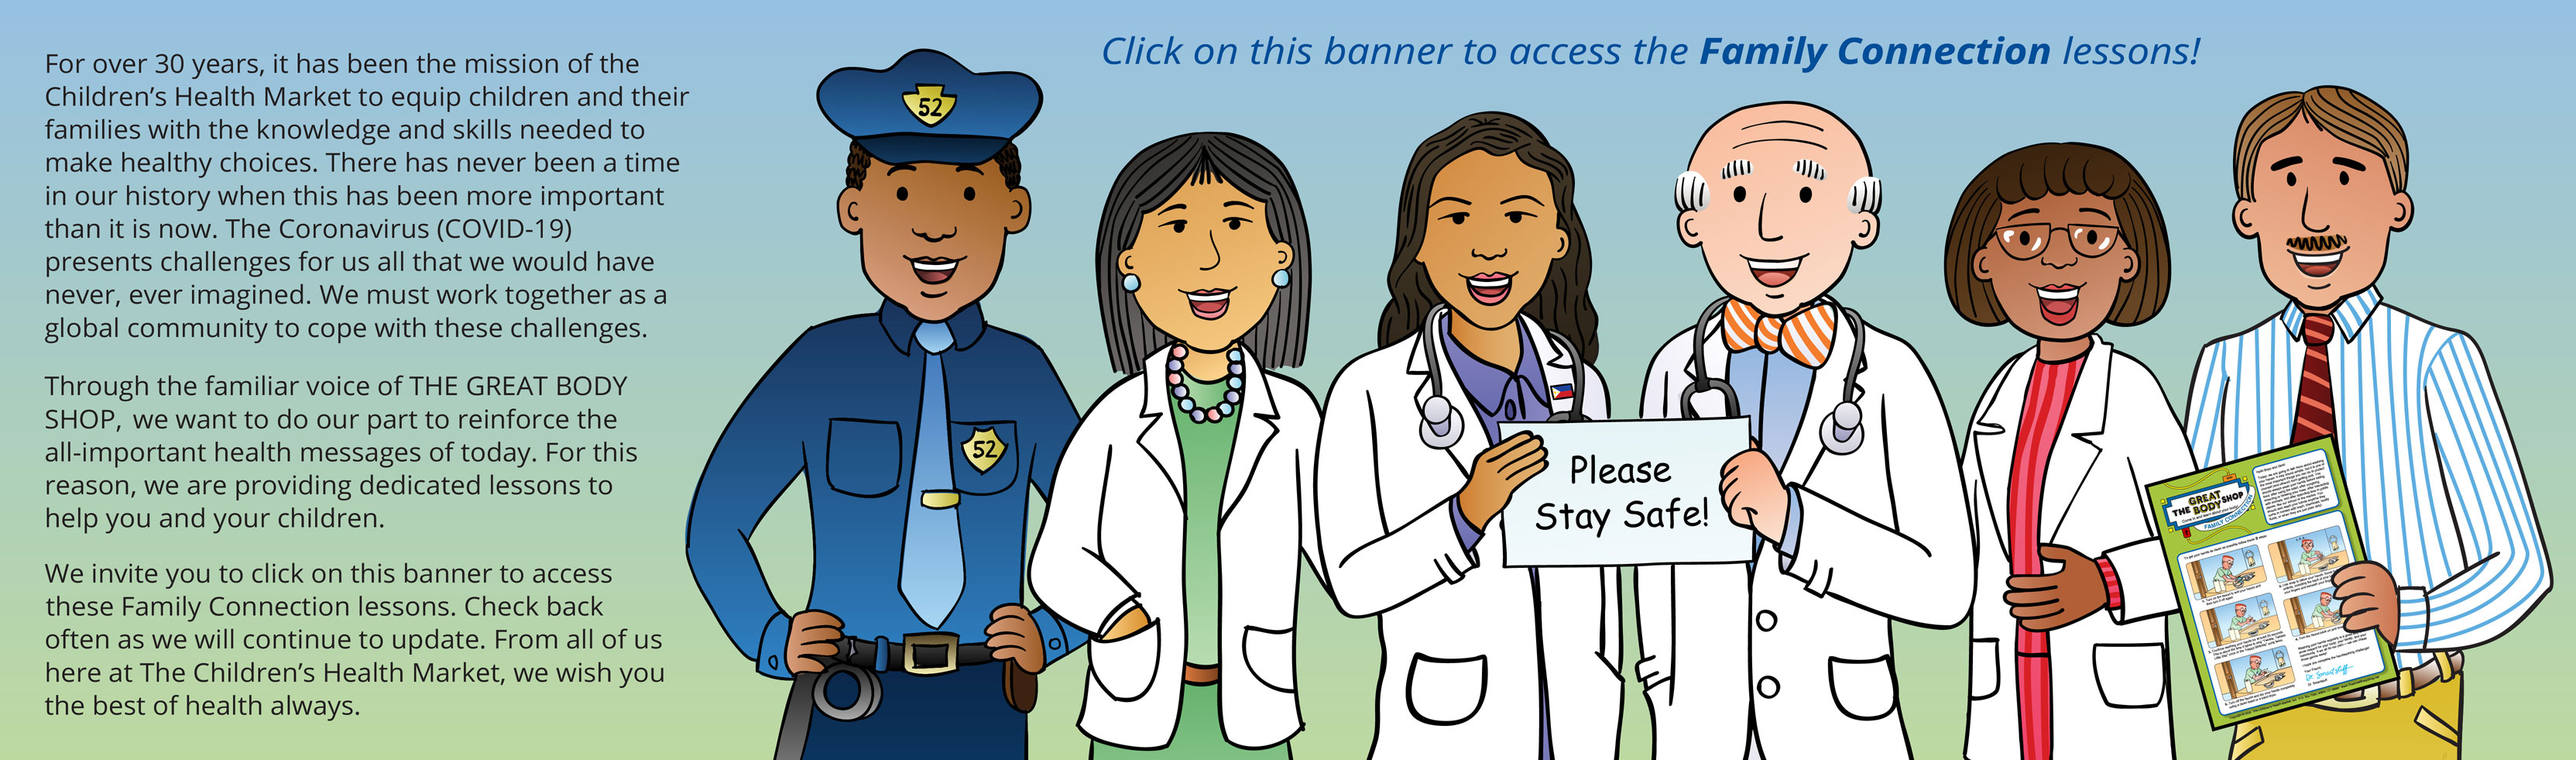 Click on this banner to access the Family Connection lessons!